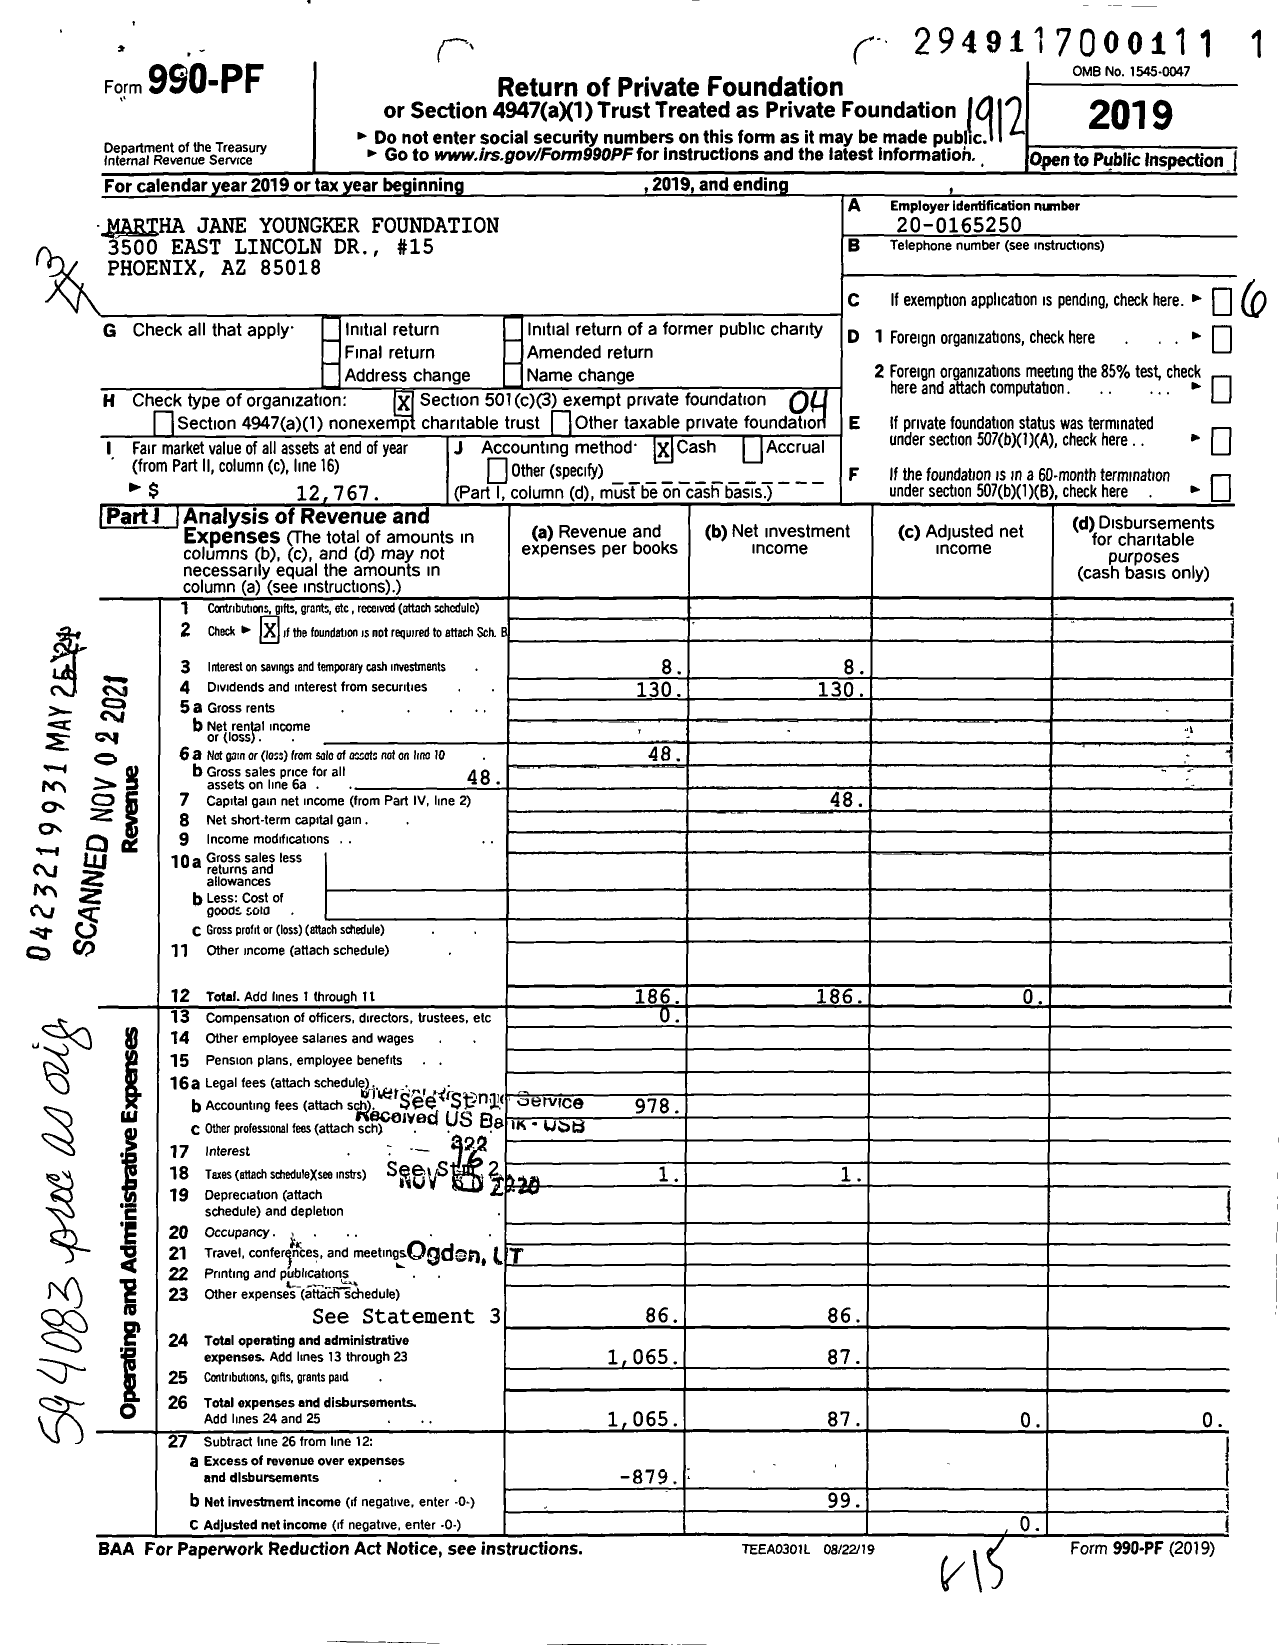 Image of first page of 2019 Form 990PF for Martha Jane Youngker Foundation